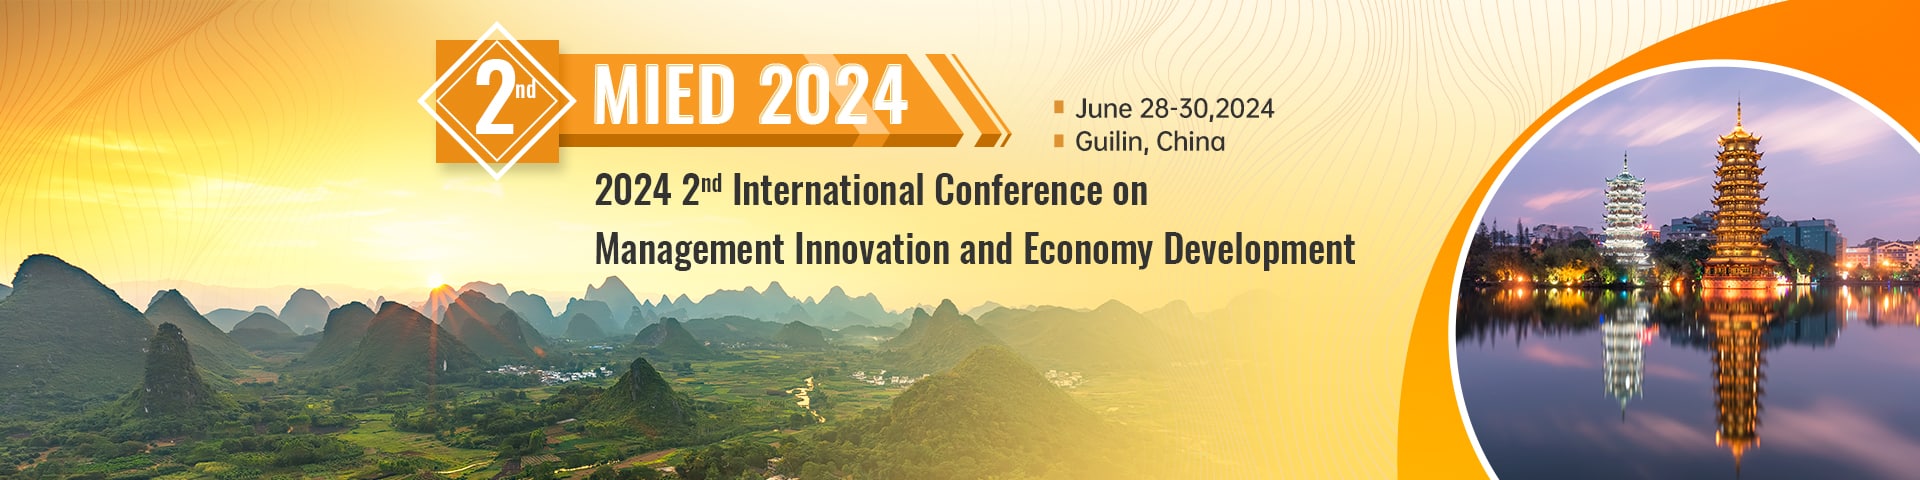 2024 2nd International Conference on Management Innovation and Economic Development  (MIED 2024)